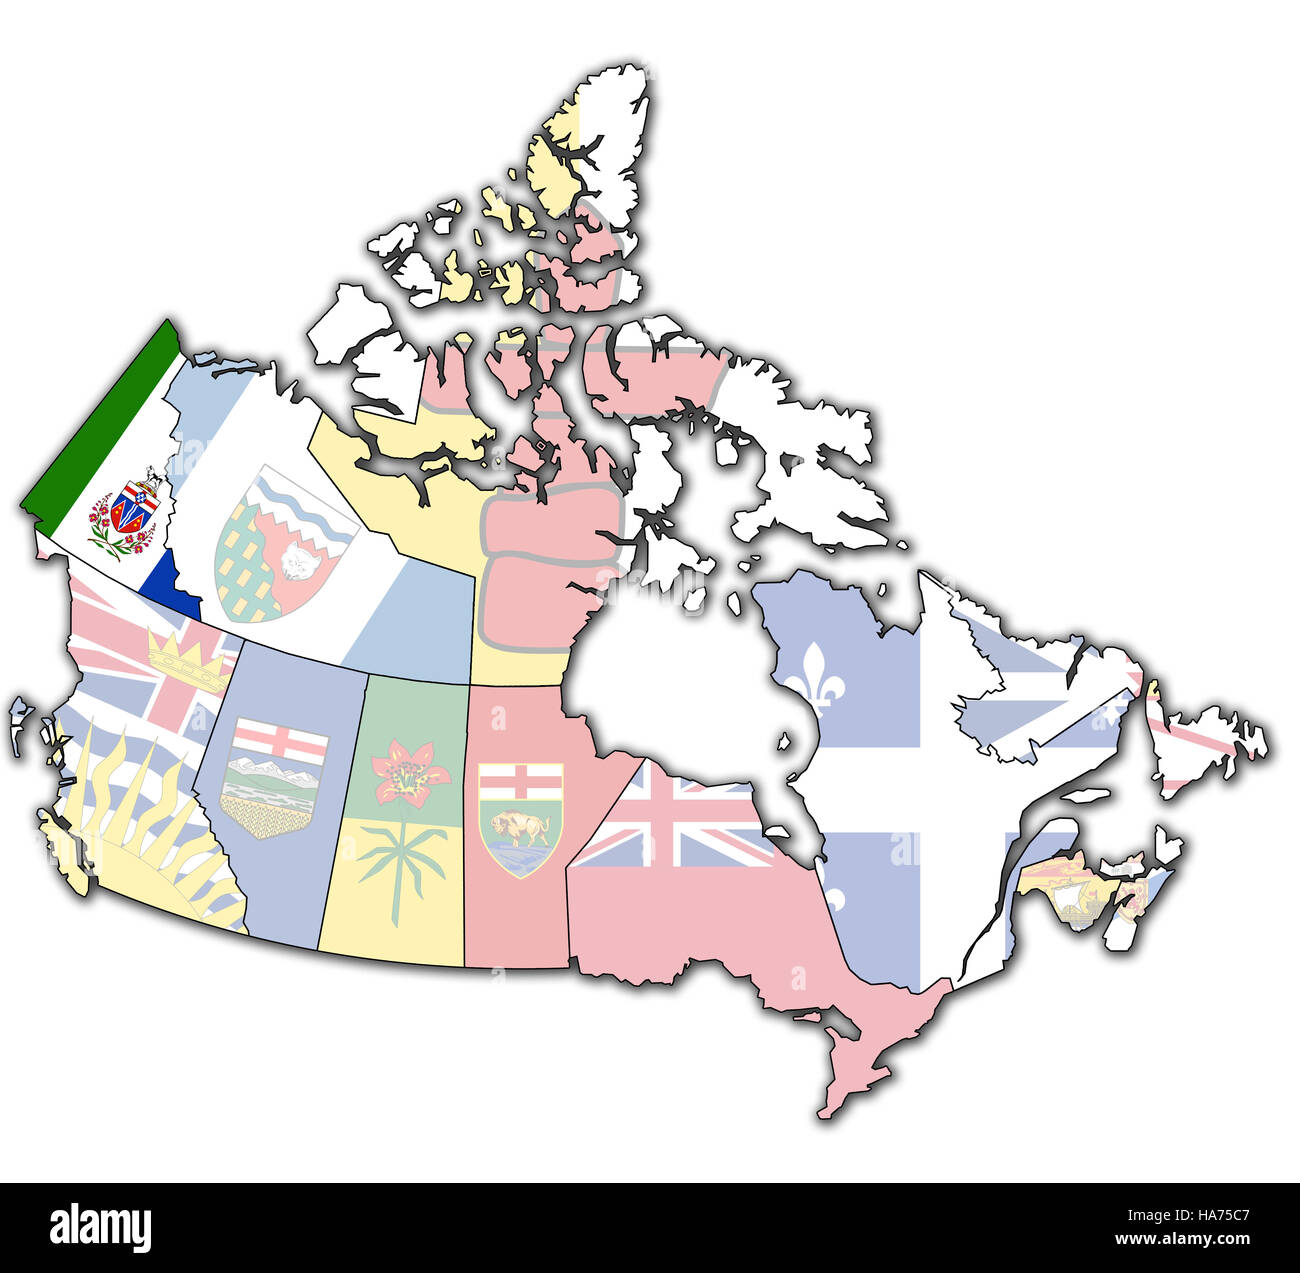 yukon on administration map of canada with flags Stock Photo